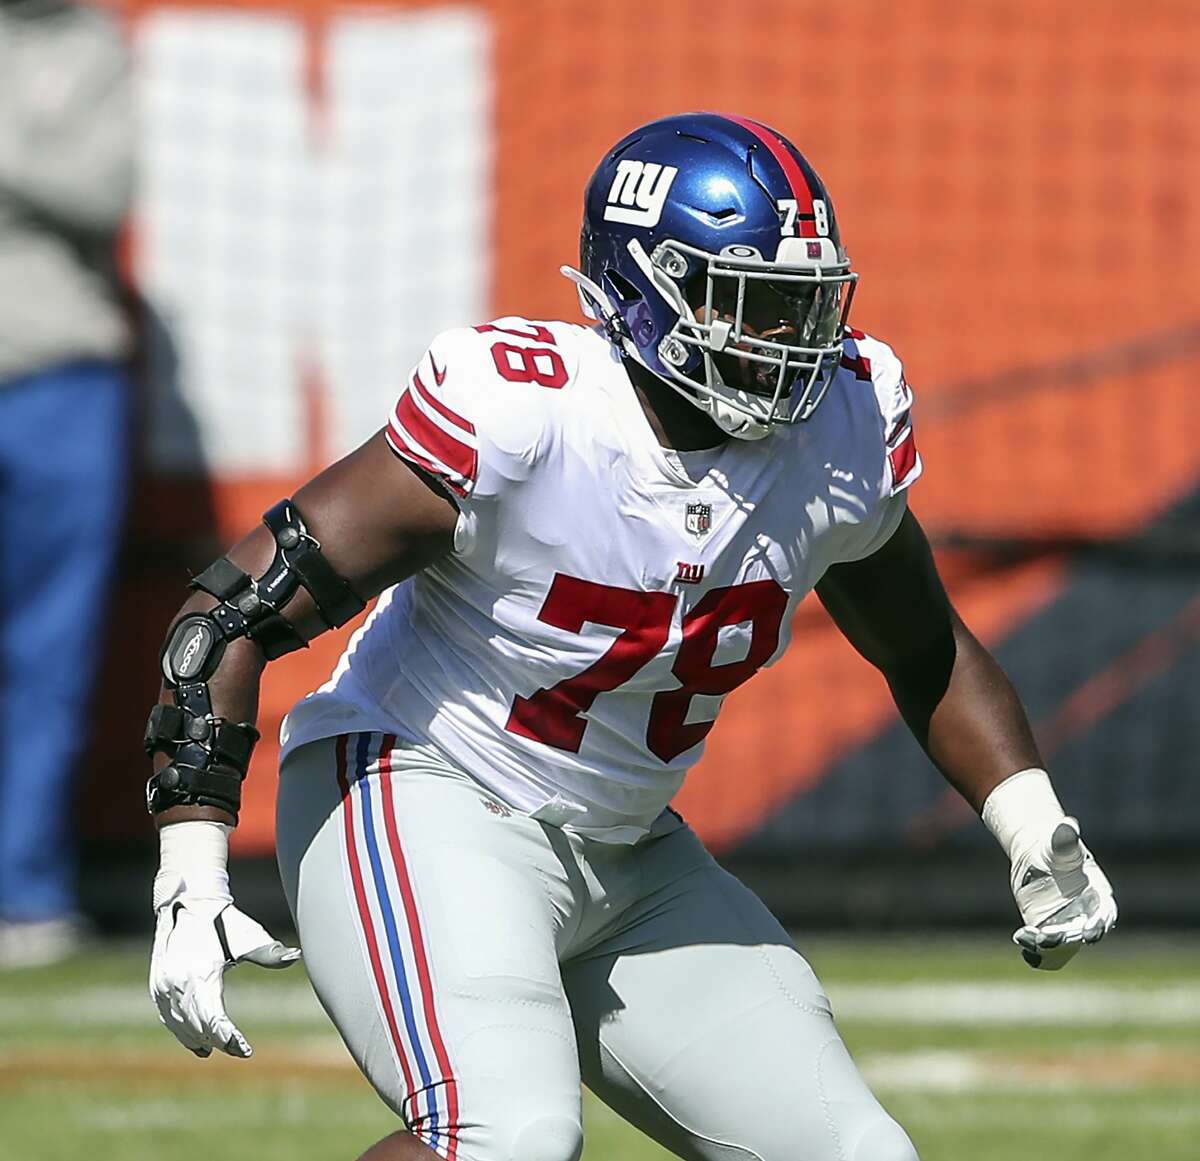 FILE - In this Sunday, Sept. 20, 2020, file photo, New York Giants offensive tackle Andrew Thomas (78) looks to block against the Chicago Bears during the first half of an NFL football game in Chicago. Thomas saw some of the NFL's top passer rushers in his first two games and the rookie left tackle didn't disappoint the Giants. (AP Photo/Kamil Krzaczynski, File)